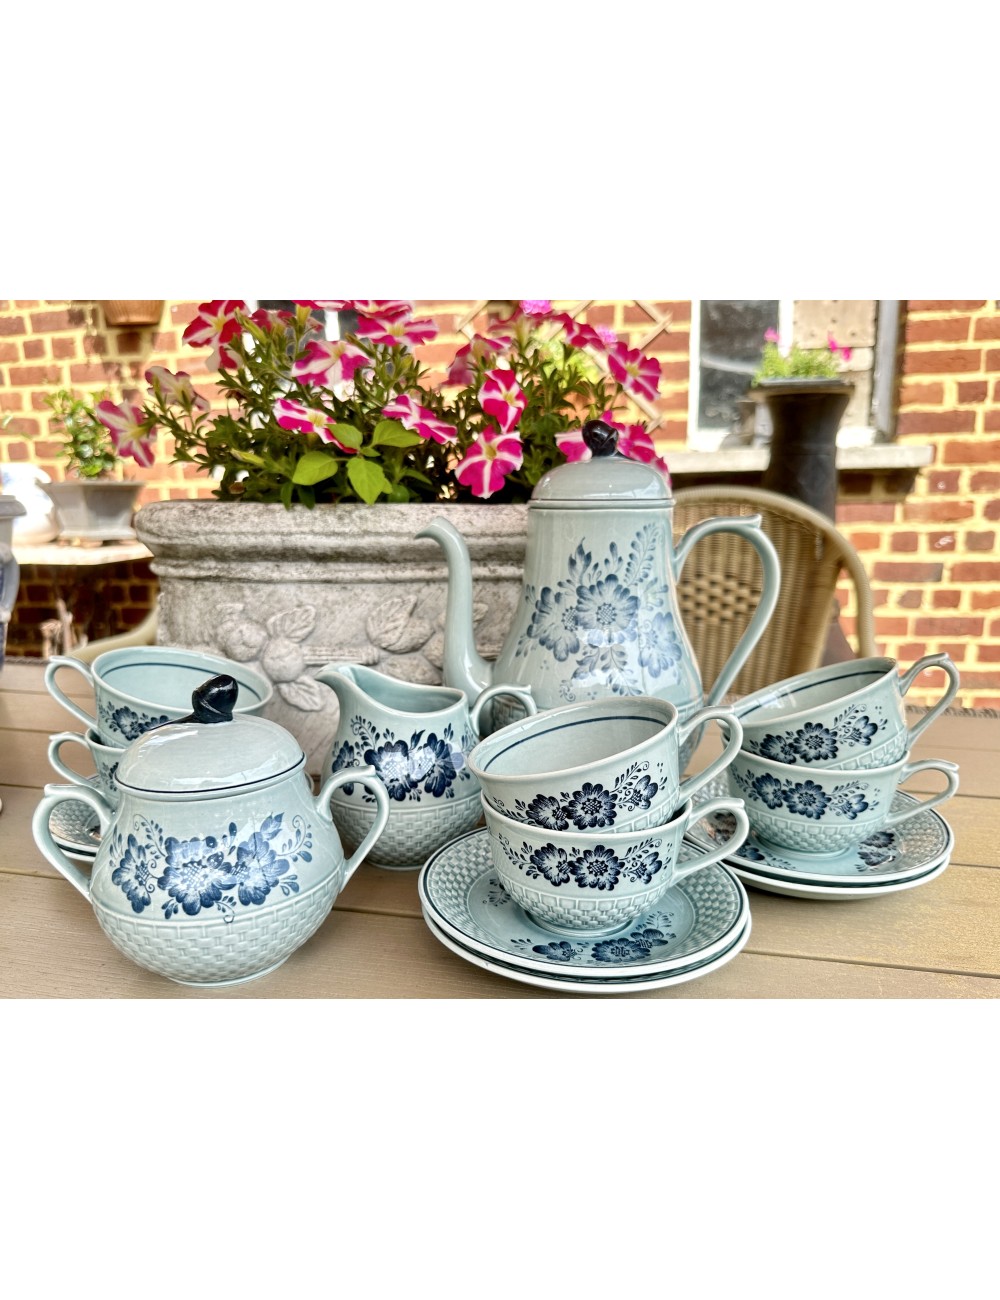 Coffee set consisting of coffee pot, sugar bowl, milk jug and 6 cups and saucers - Royal Sphinx